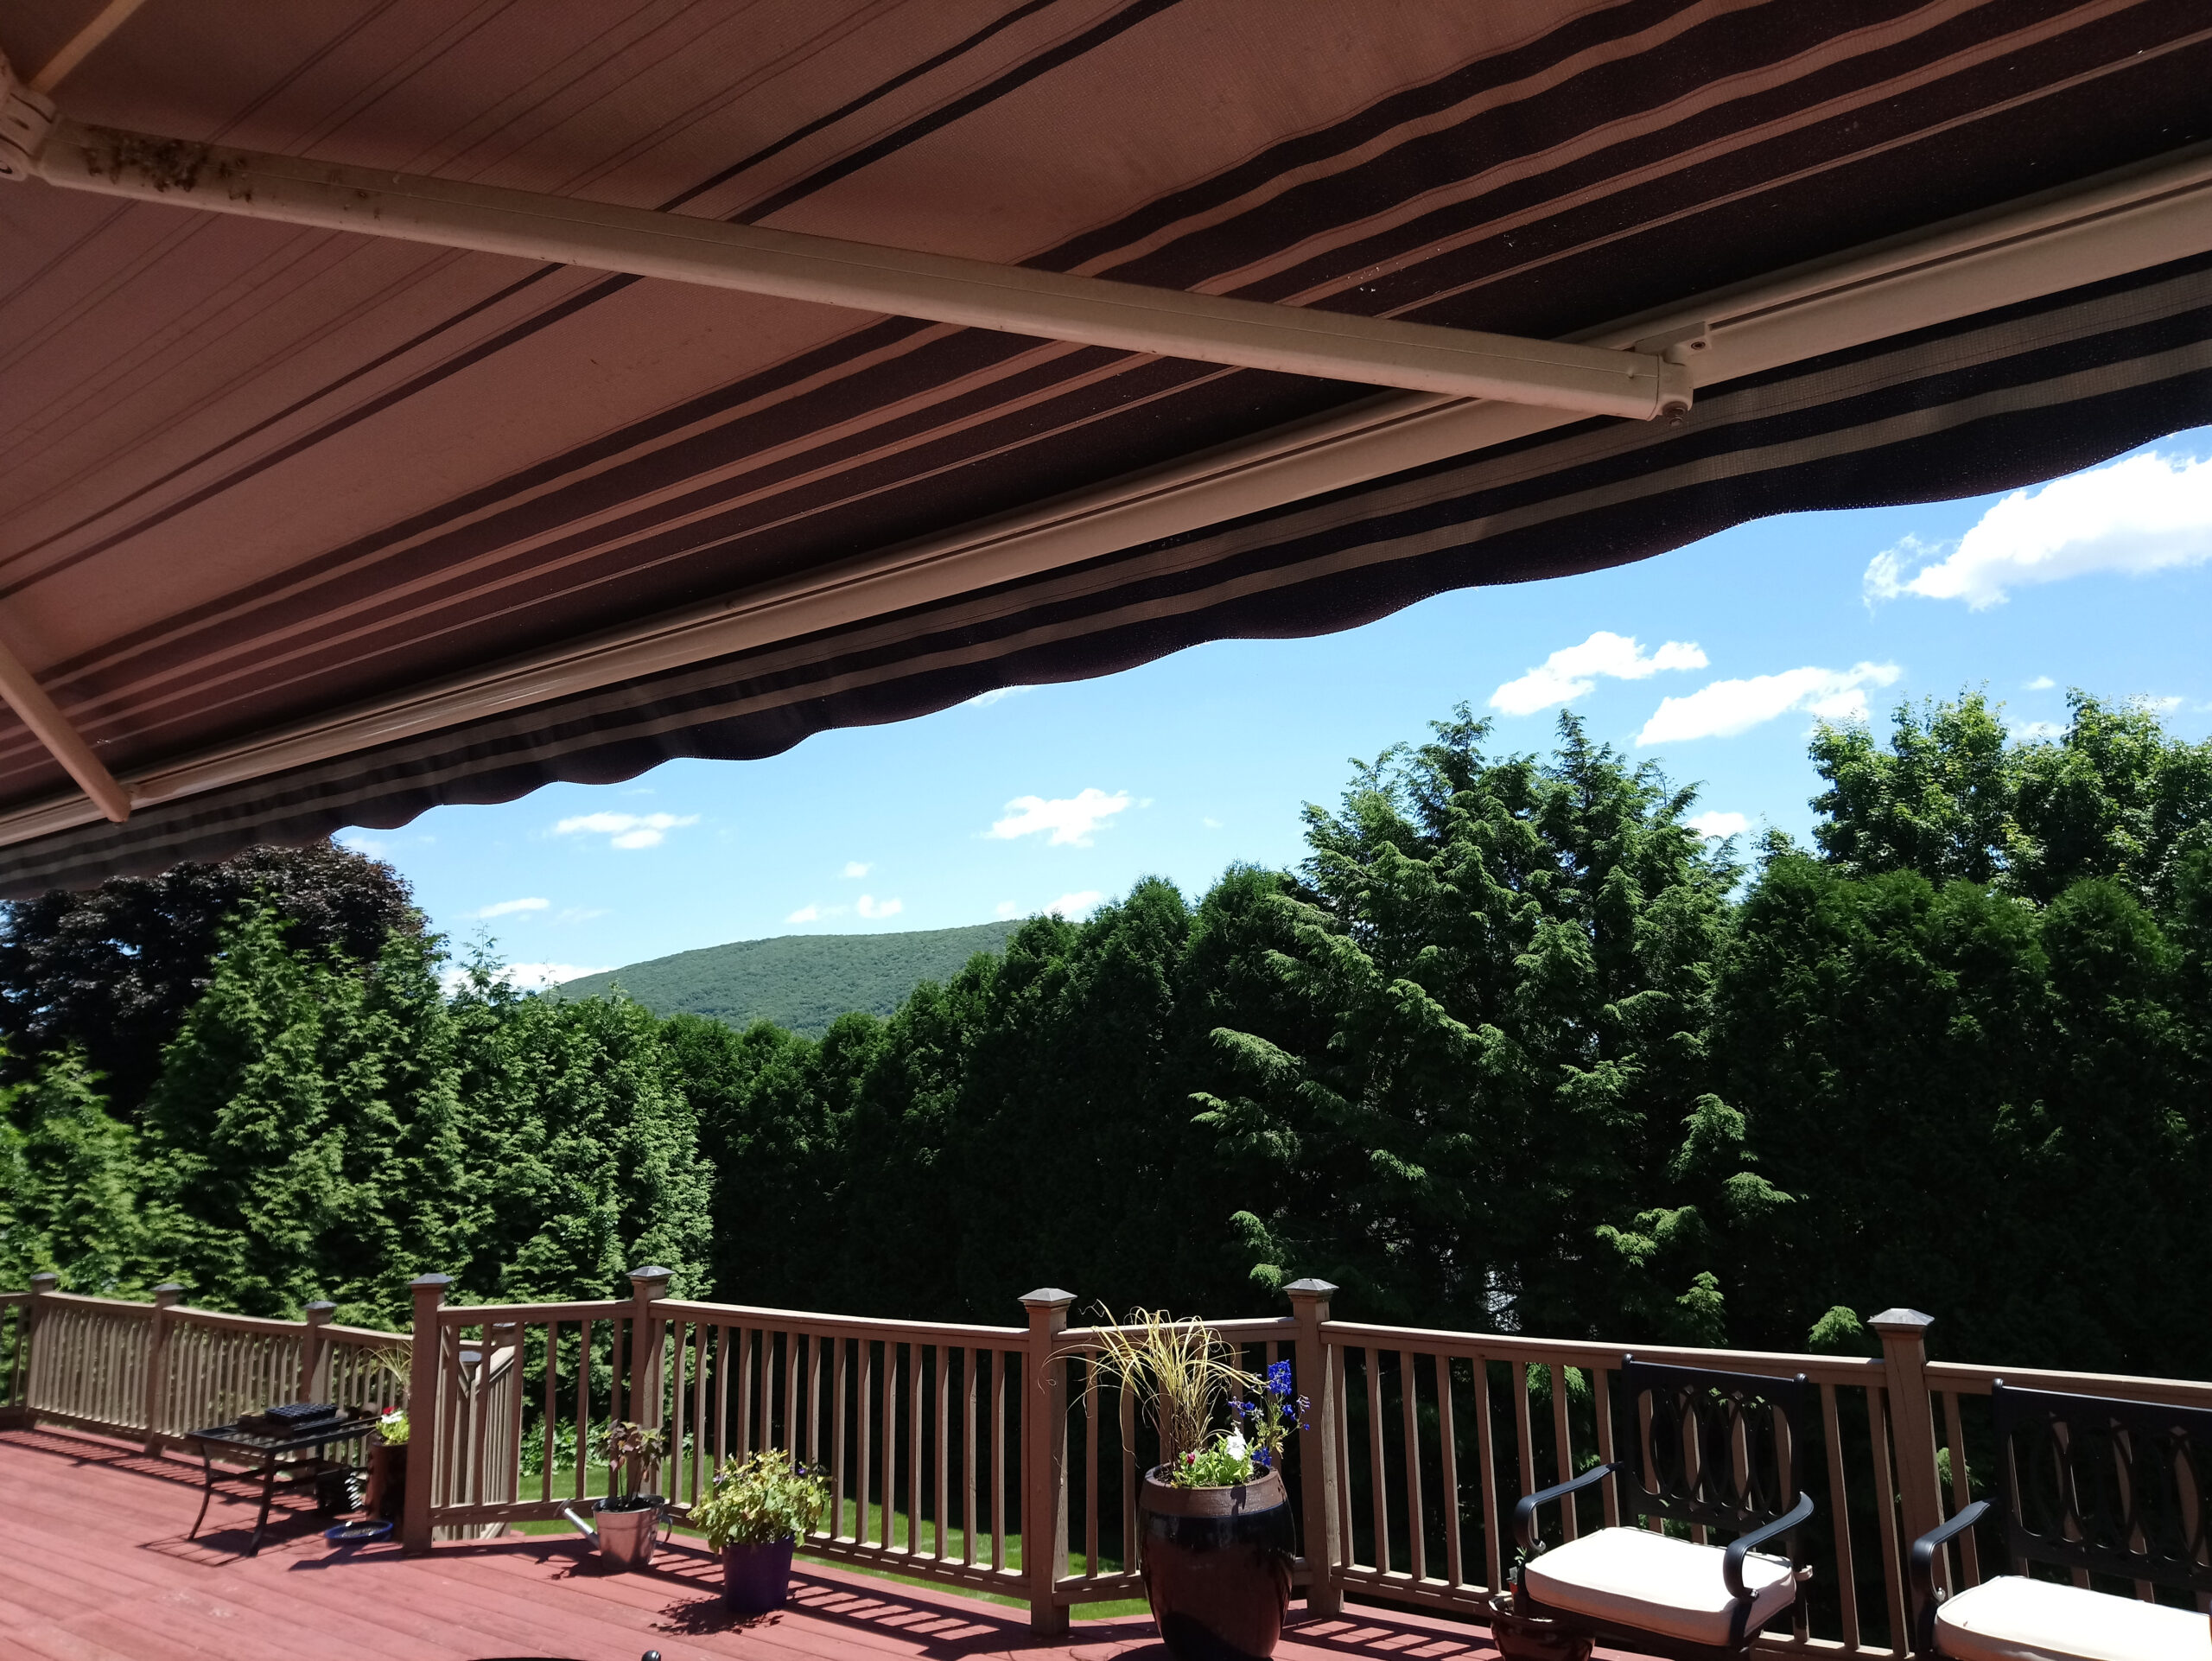 view of trees and hills fro beneath an awning